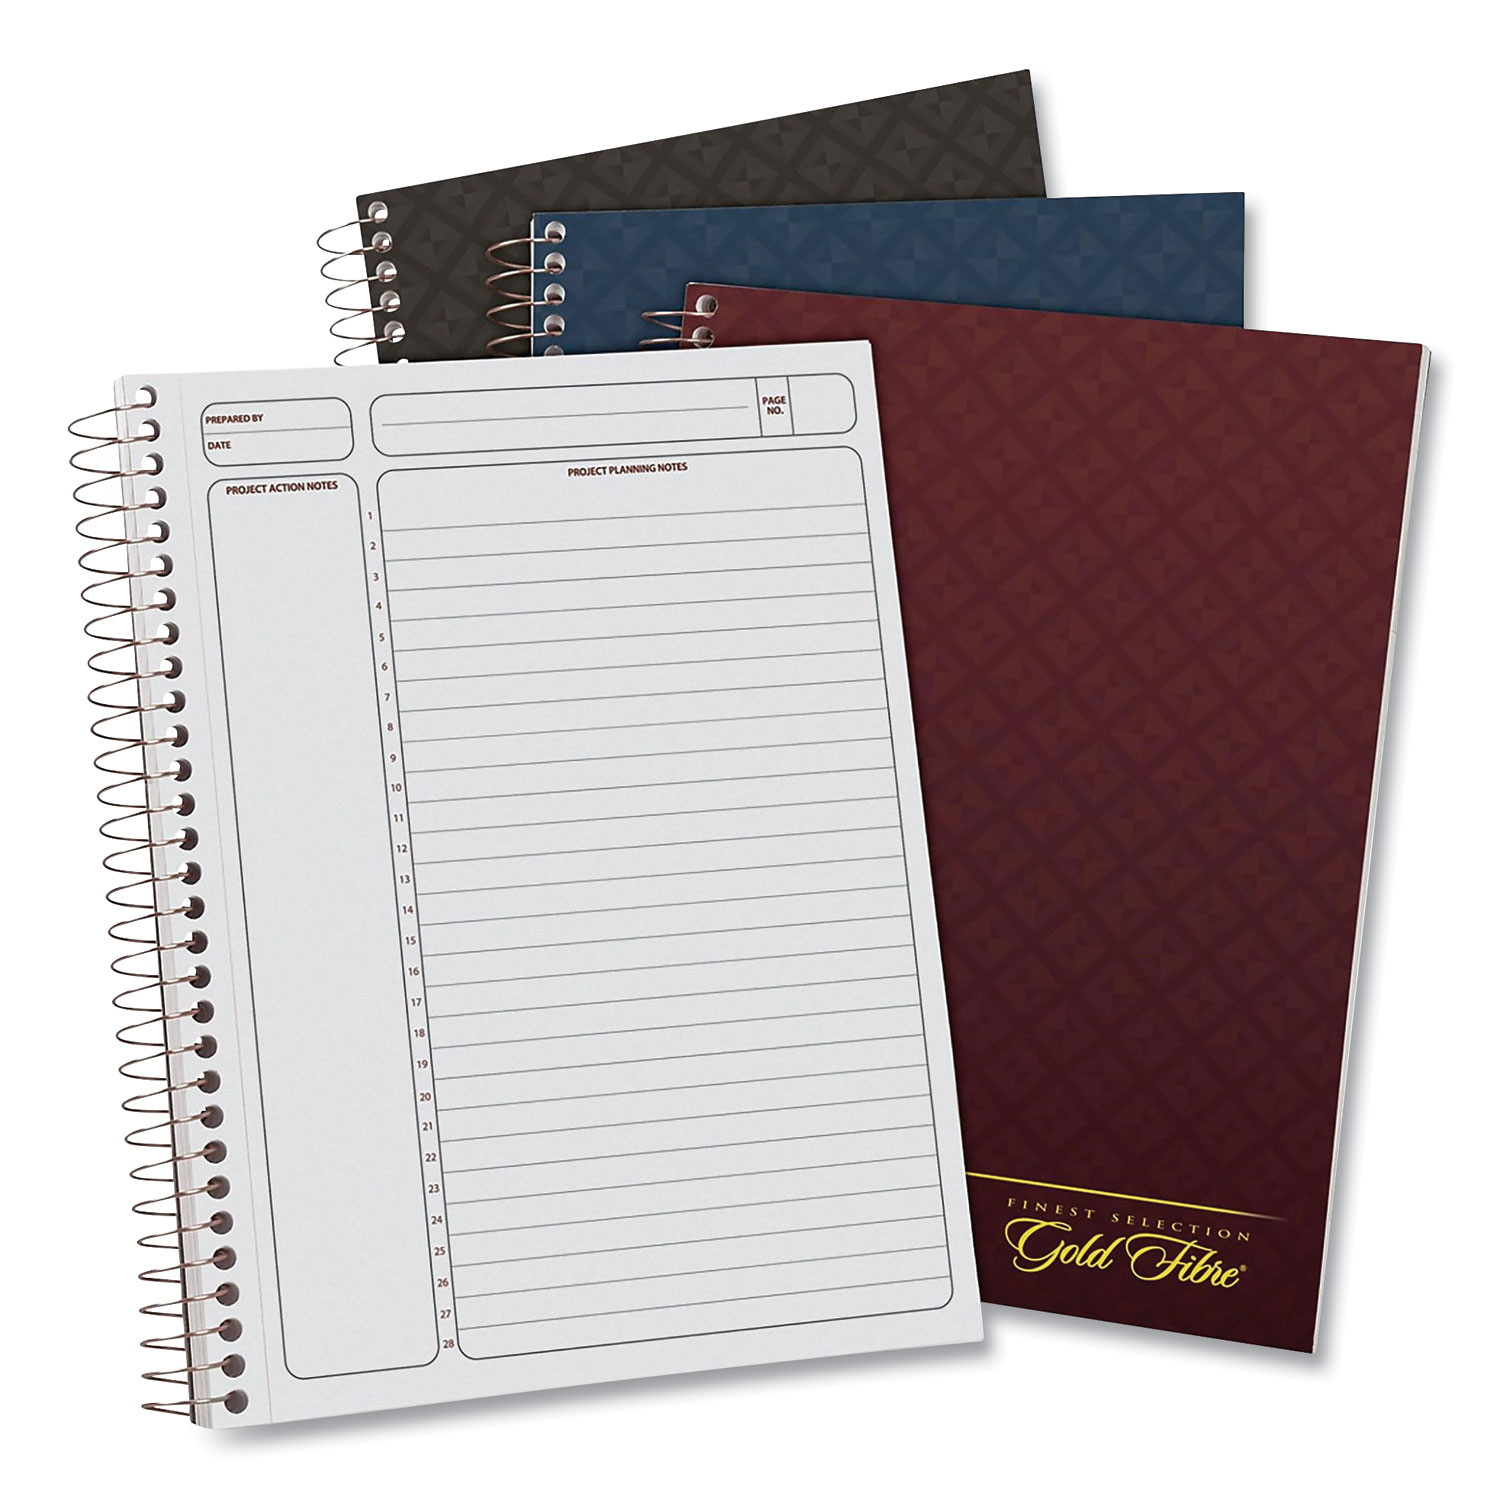  Ampad 20-817 Gold Fibre Project Planner, Cornell Rule, Randomly Assorted Covers, 9.5 x 7.25, 84 Sheets (AMP430488) 